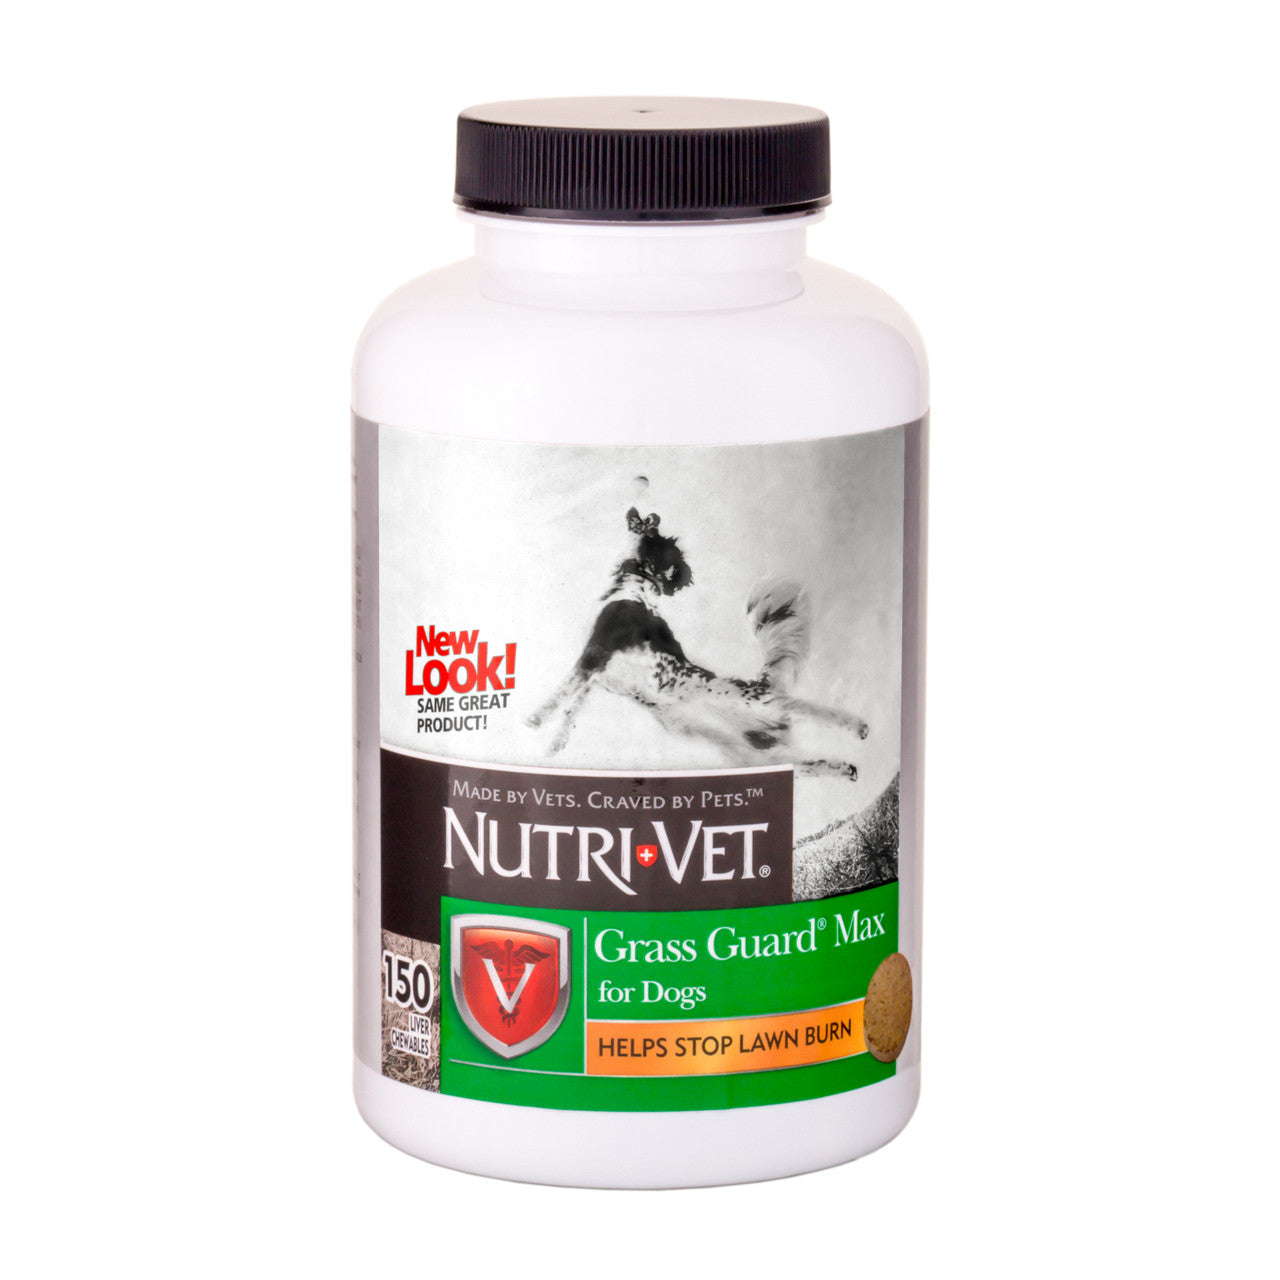 Nutri-Vet Grass Guard Max Chewables for Dogs Liver 150ct 150 count